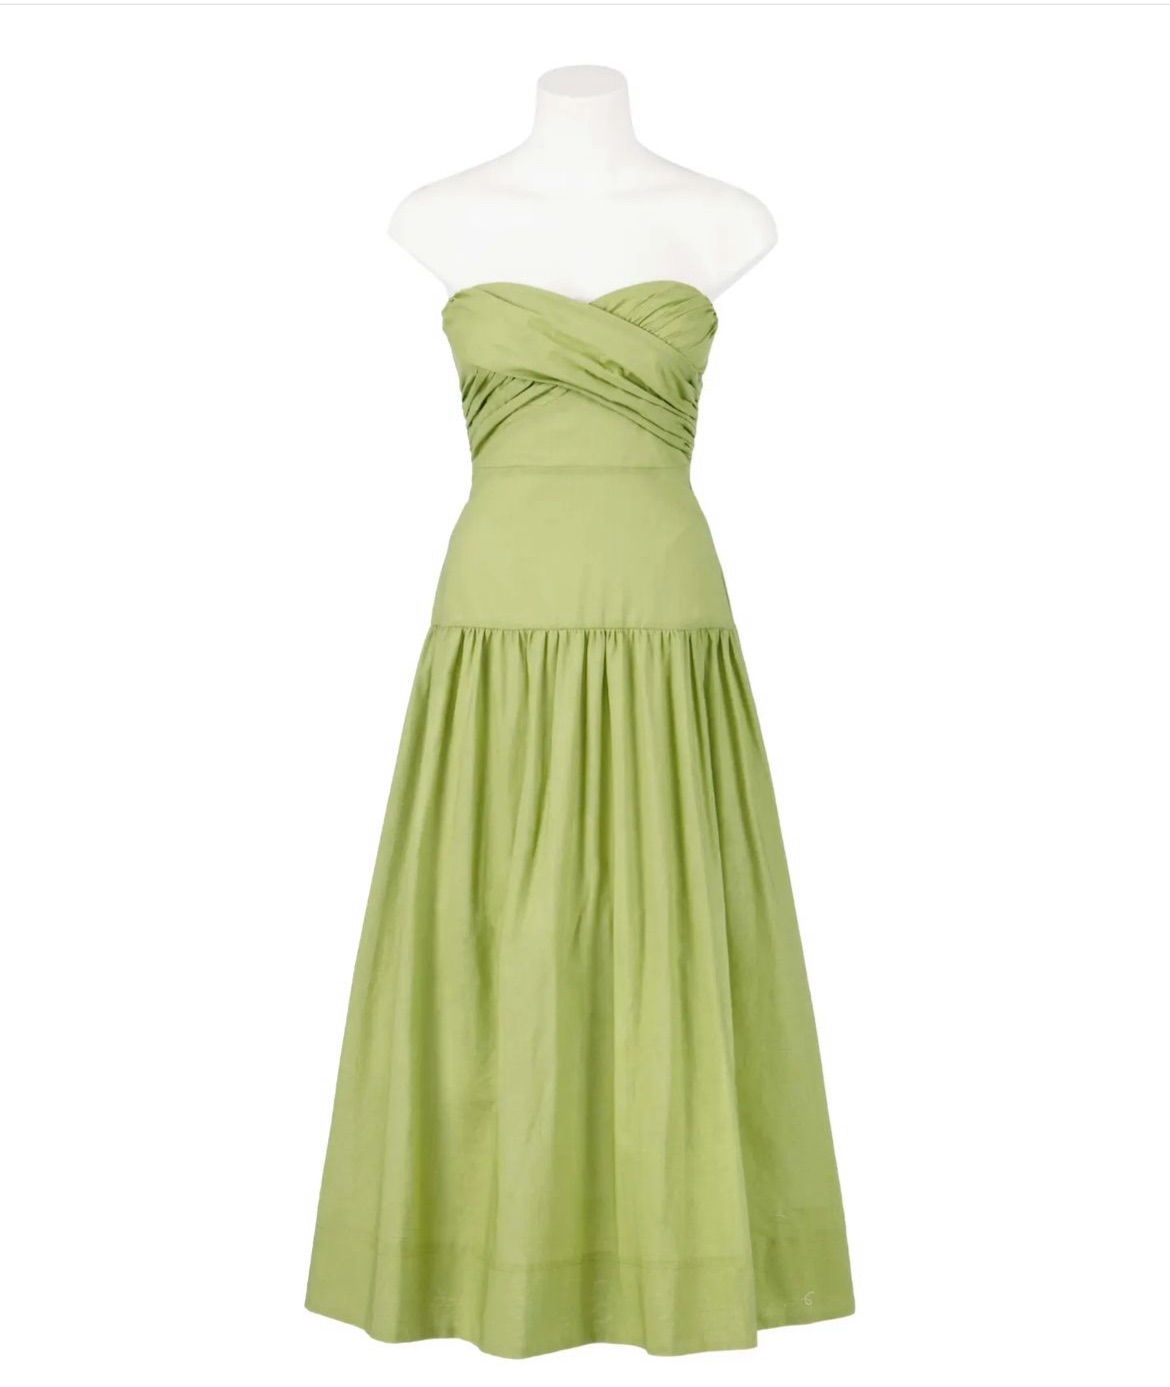 All About May Harley Dress - Sage